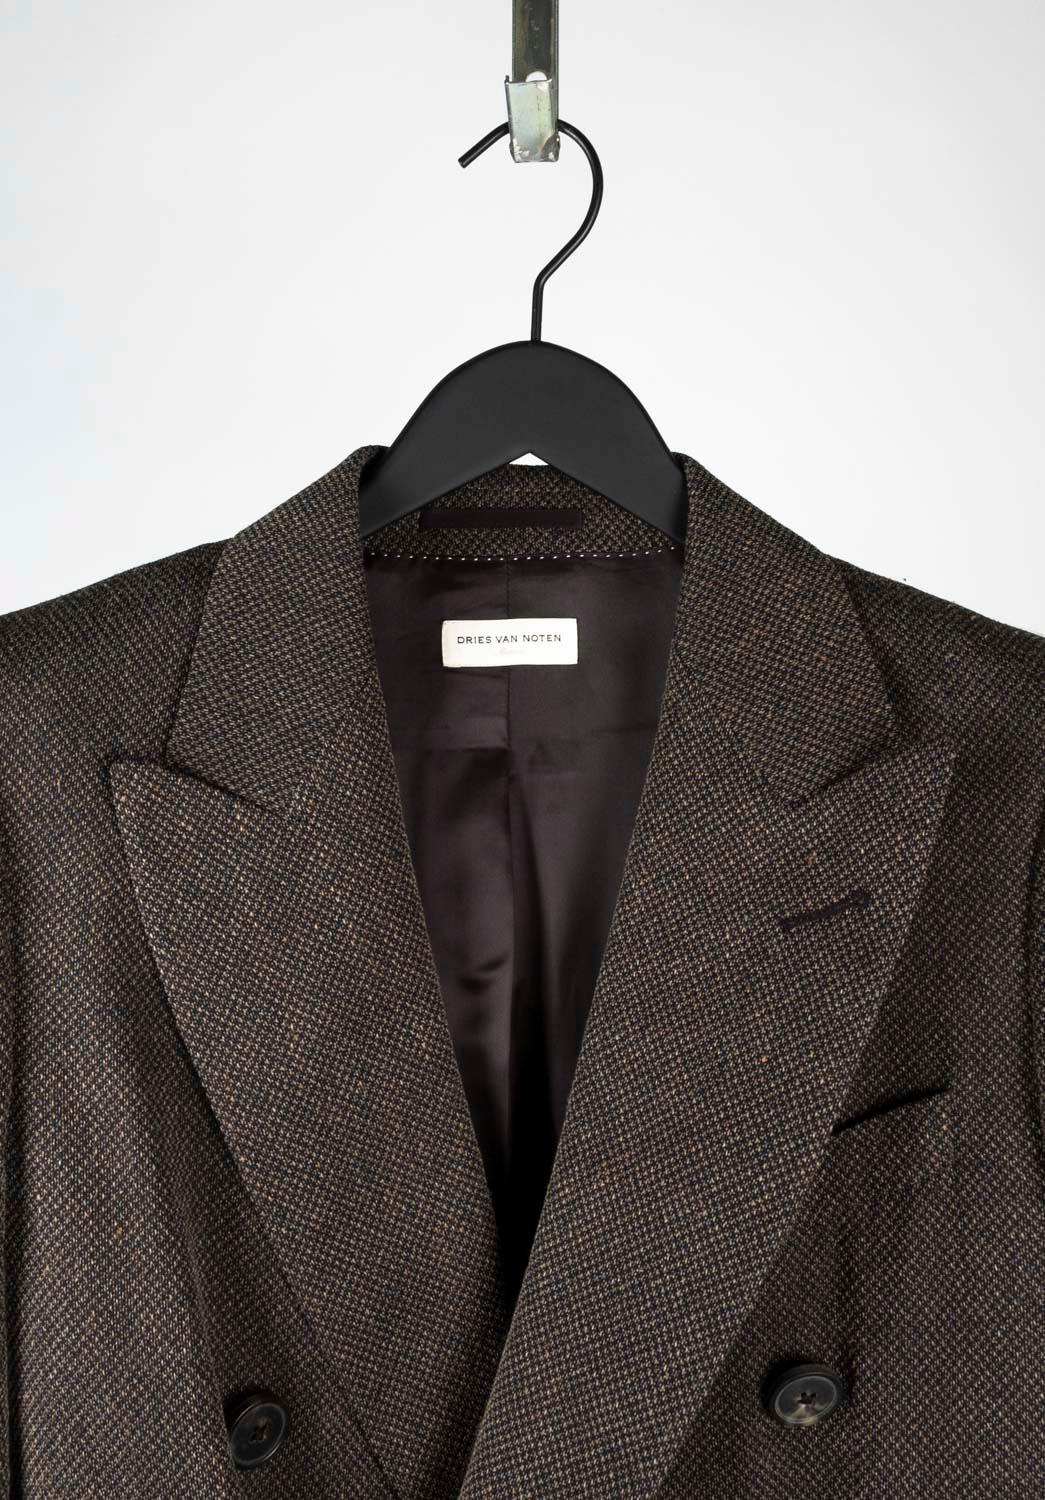 100% genuine Dries Van Noten Double-breasted Coat, S546
Color: Brown
(An actual color may a bit vary due to individual computer screen interpretation)
Material: No tag, seems light spring wool/linen blend
Tag size: M
This jacket is great quality